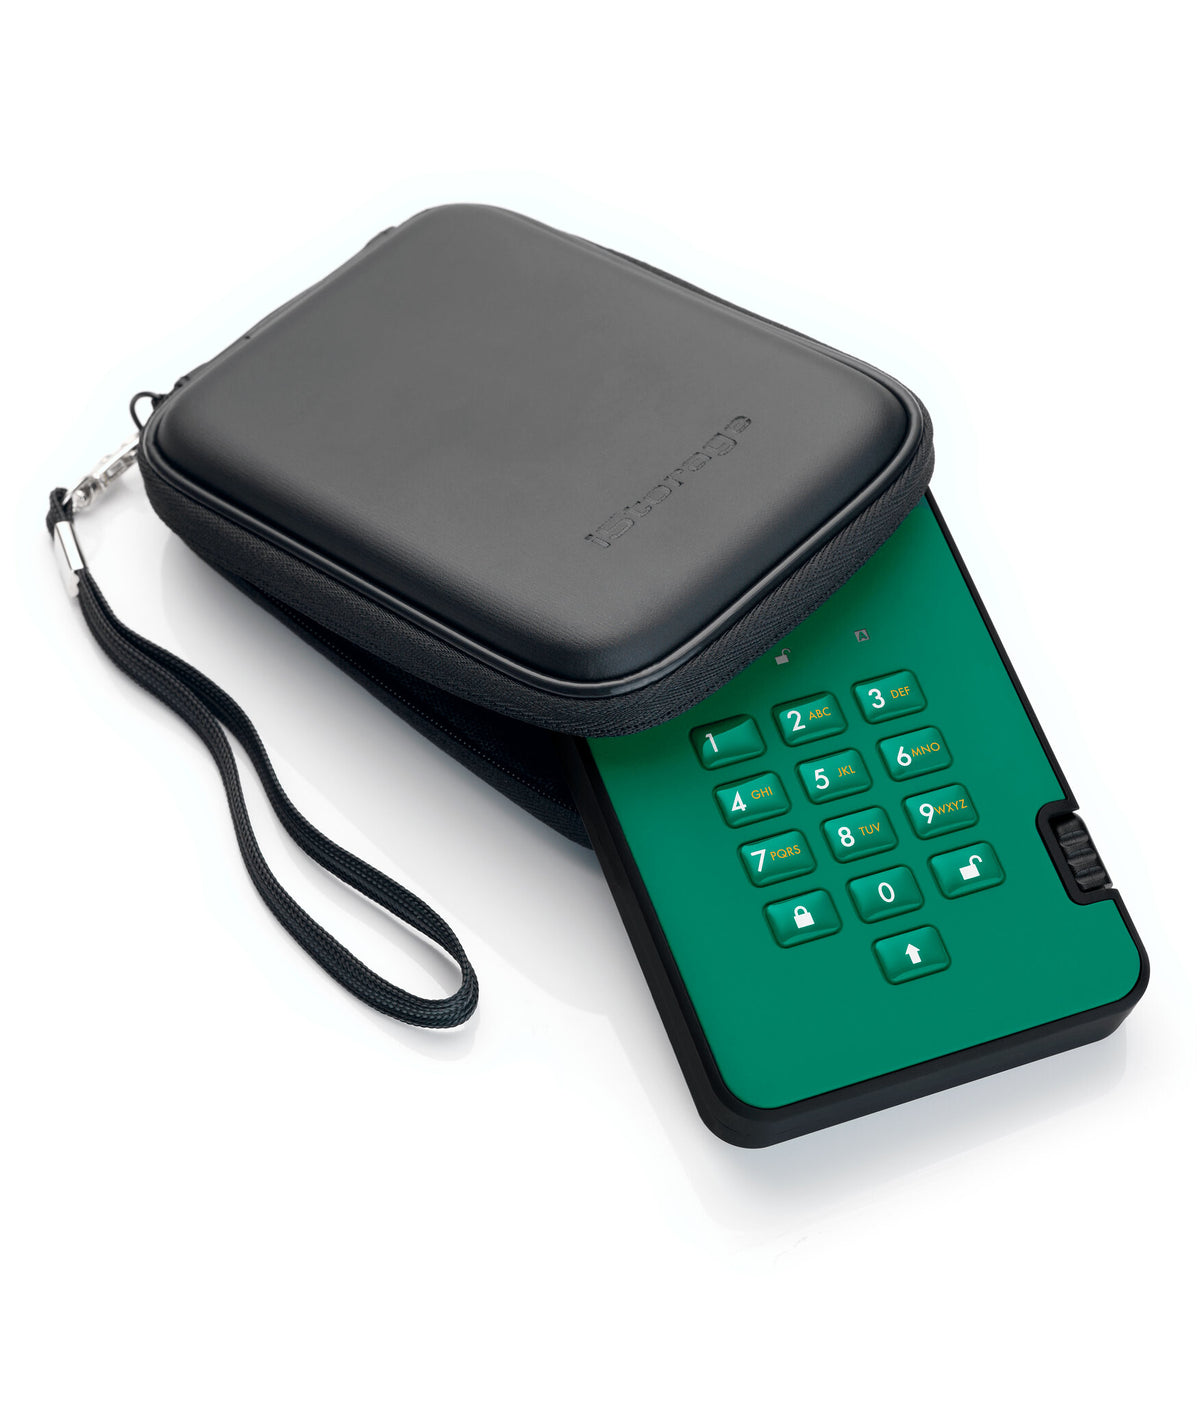 iStorage diskAshur2 - Secure Encrypted External solid state drive in Green - 2 TB